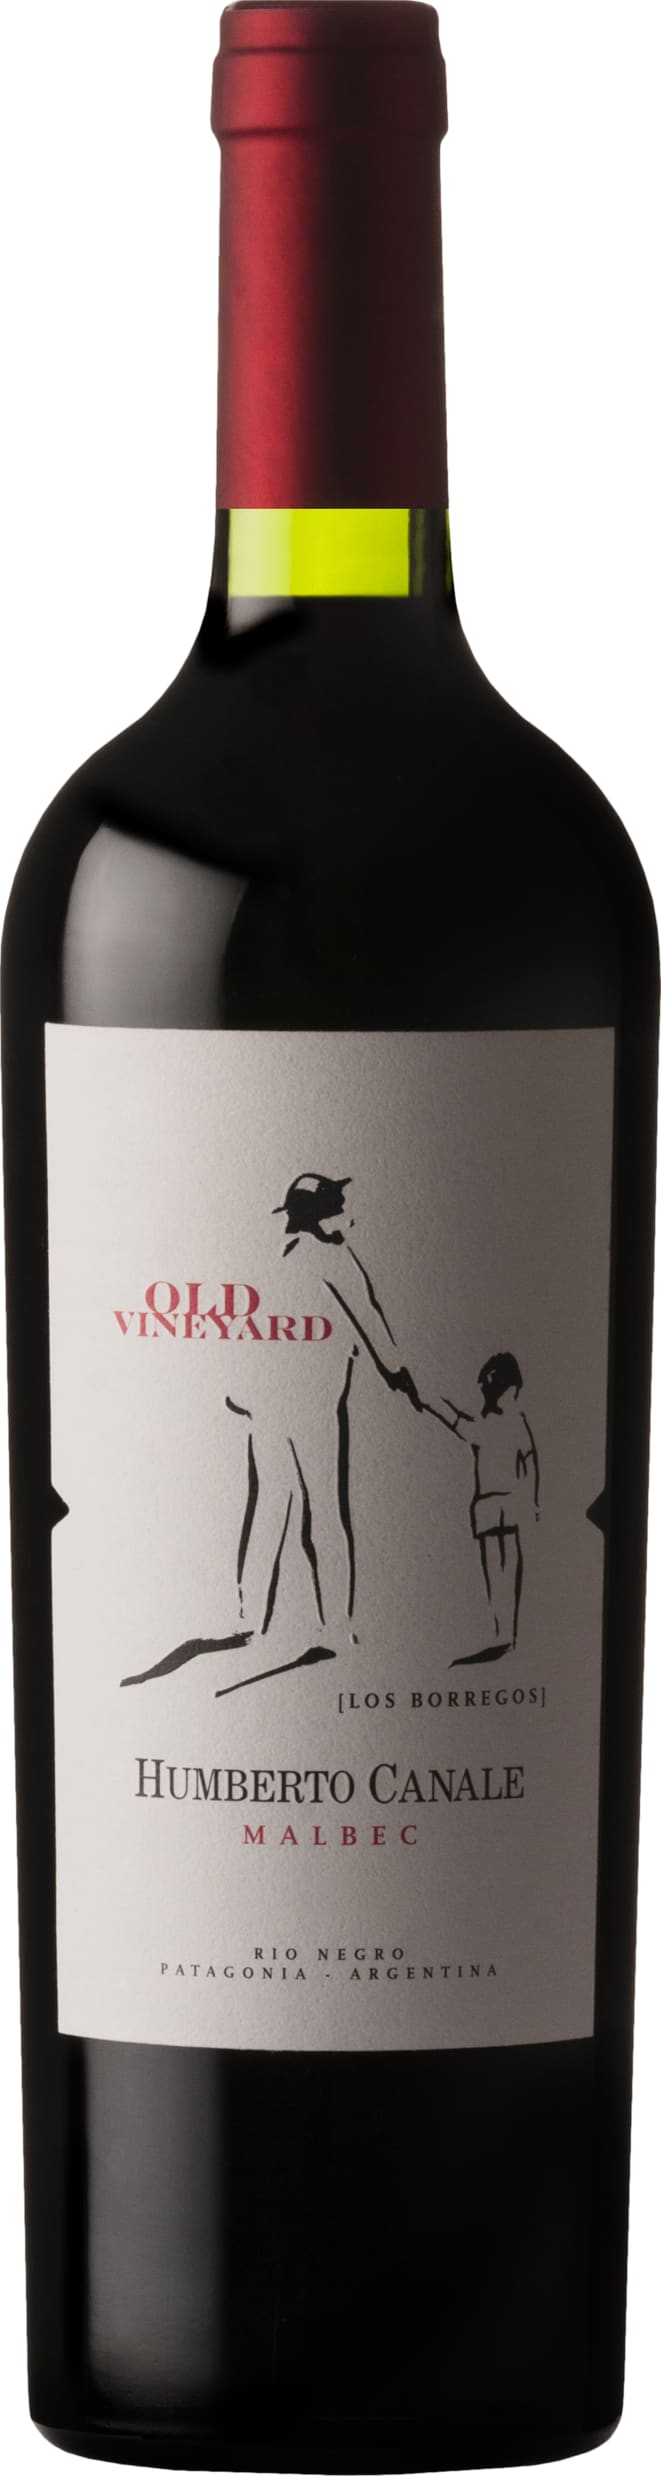 Humberto Canale Old Vine Malbec 2022 75cl - Buy Humberto Canale Wines from GREAT WINES DIRECT wine shop